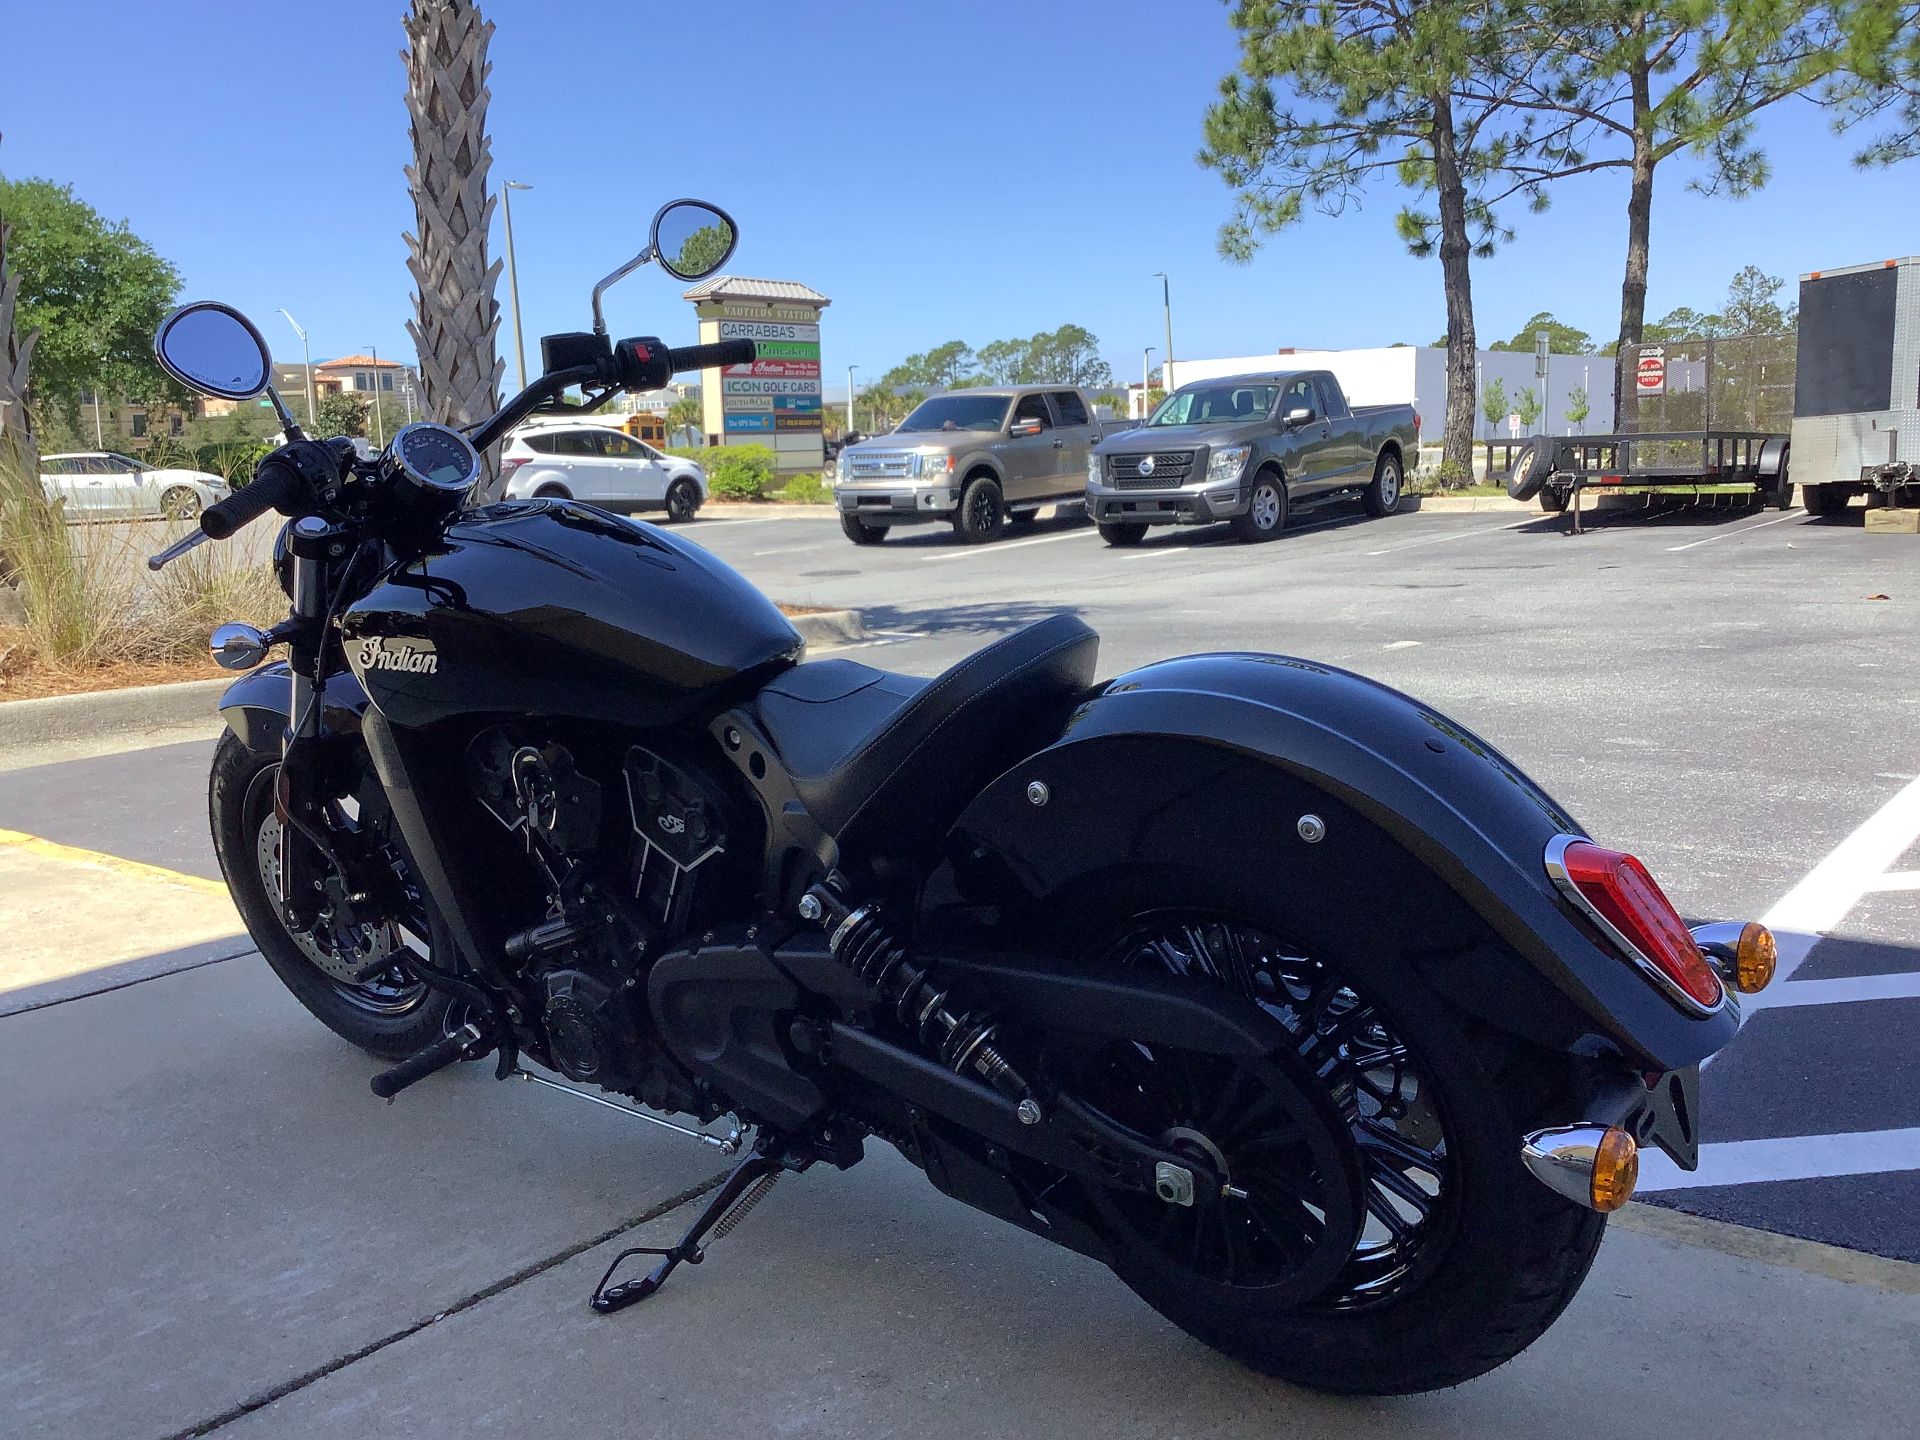 2022 Indian SCOUT 60 NON ABS in Panama City Beach, Florida - Photo 8